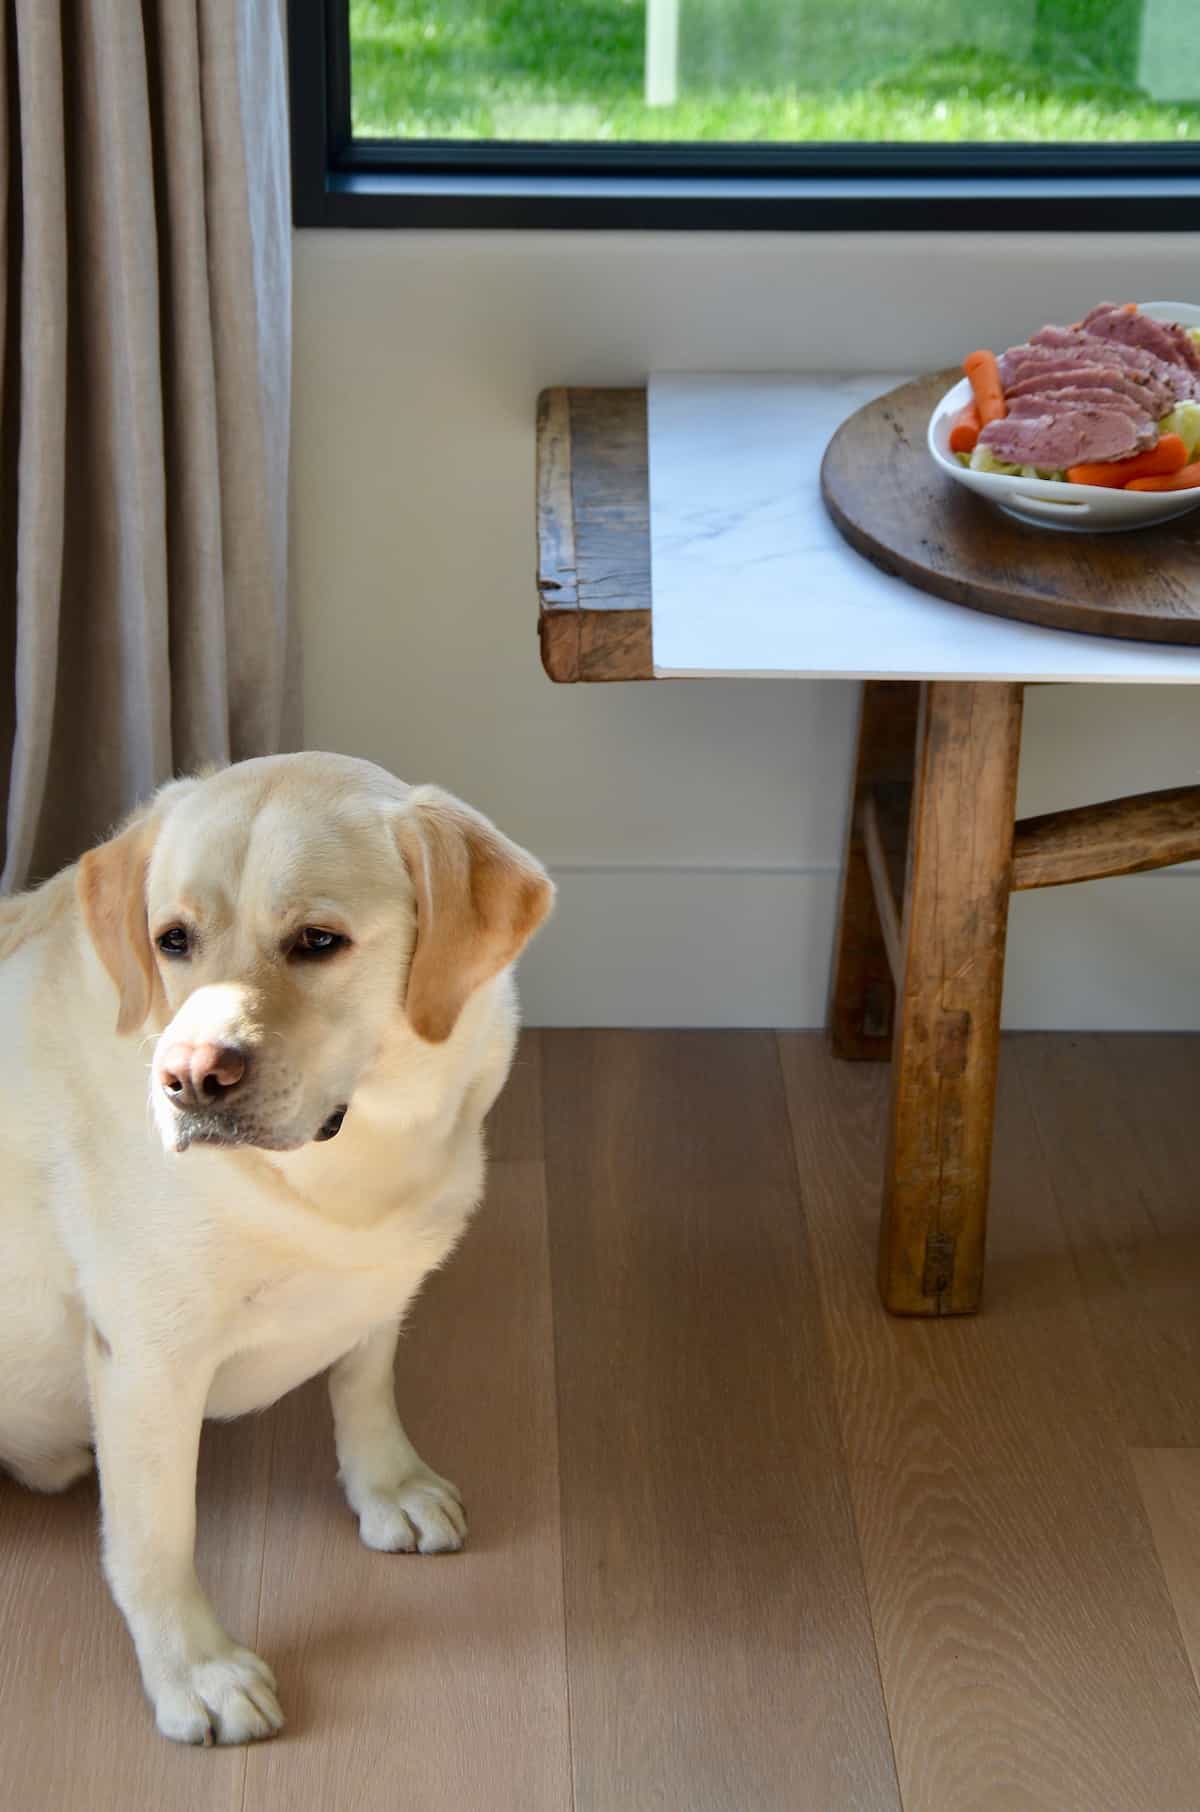 A hungry dog waits next to platter of corned beef with cabbage and carrots sitting on a table.